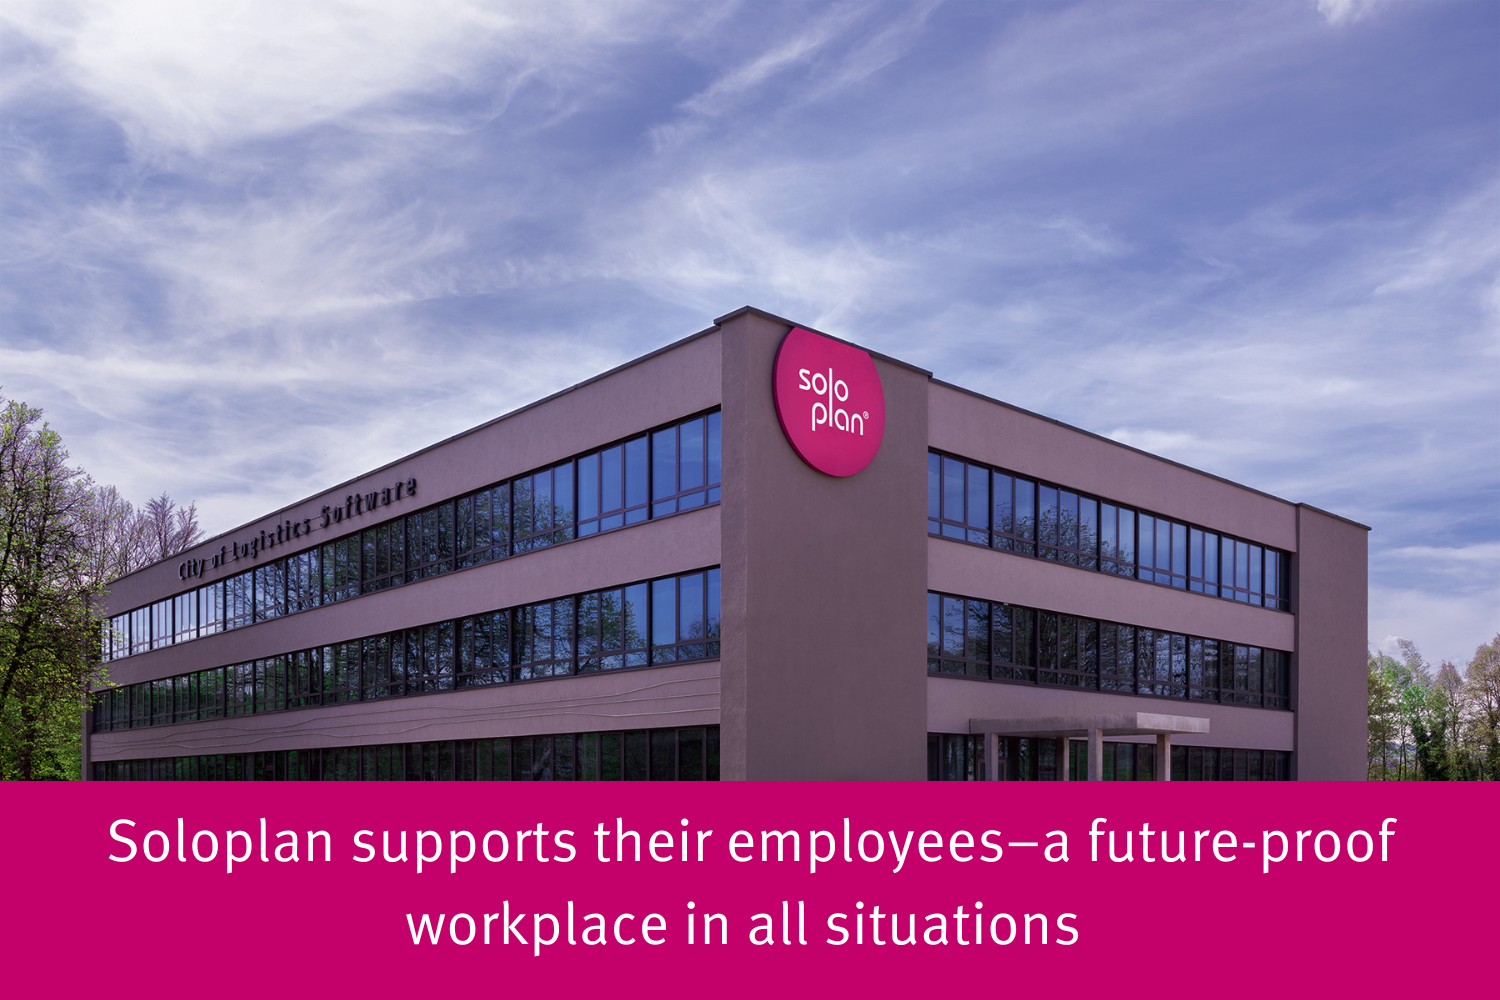 Soloplan supports their employees–a future-proof workplace in all situations